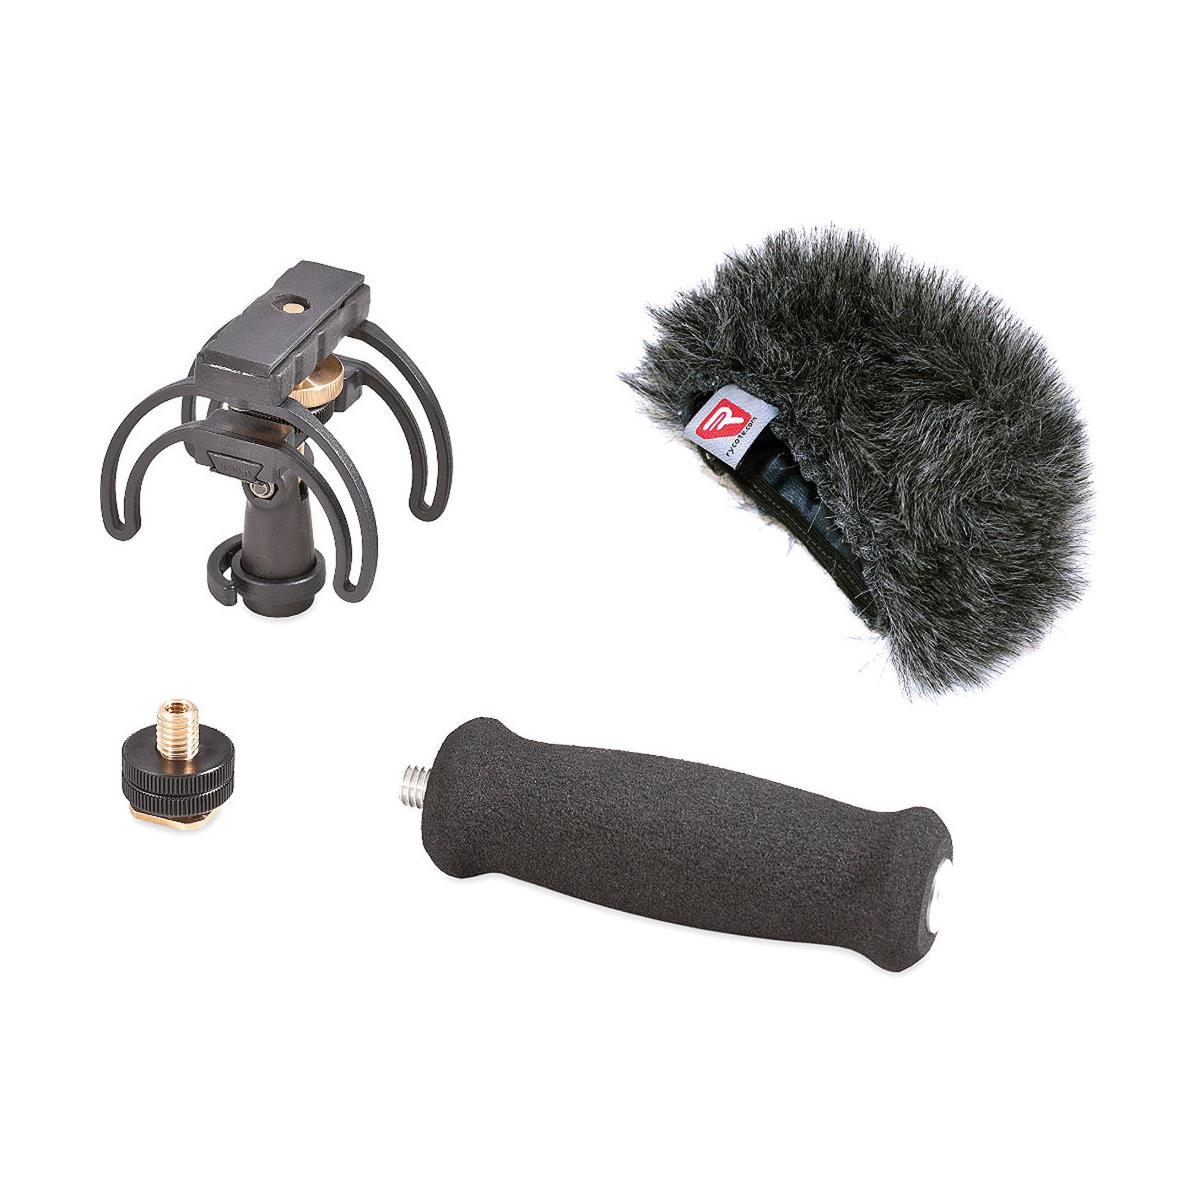 

Rycote Recorder Audio Kit for Tascam DR-100/DR-100 MKII Recorder